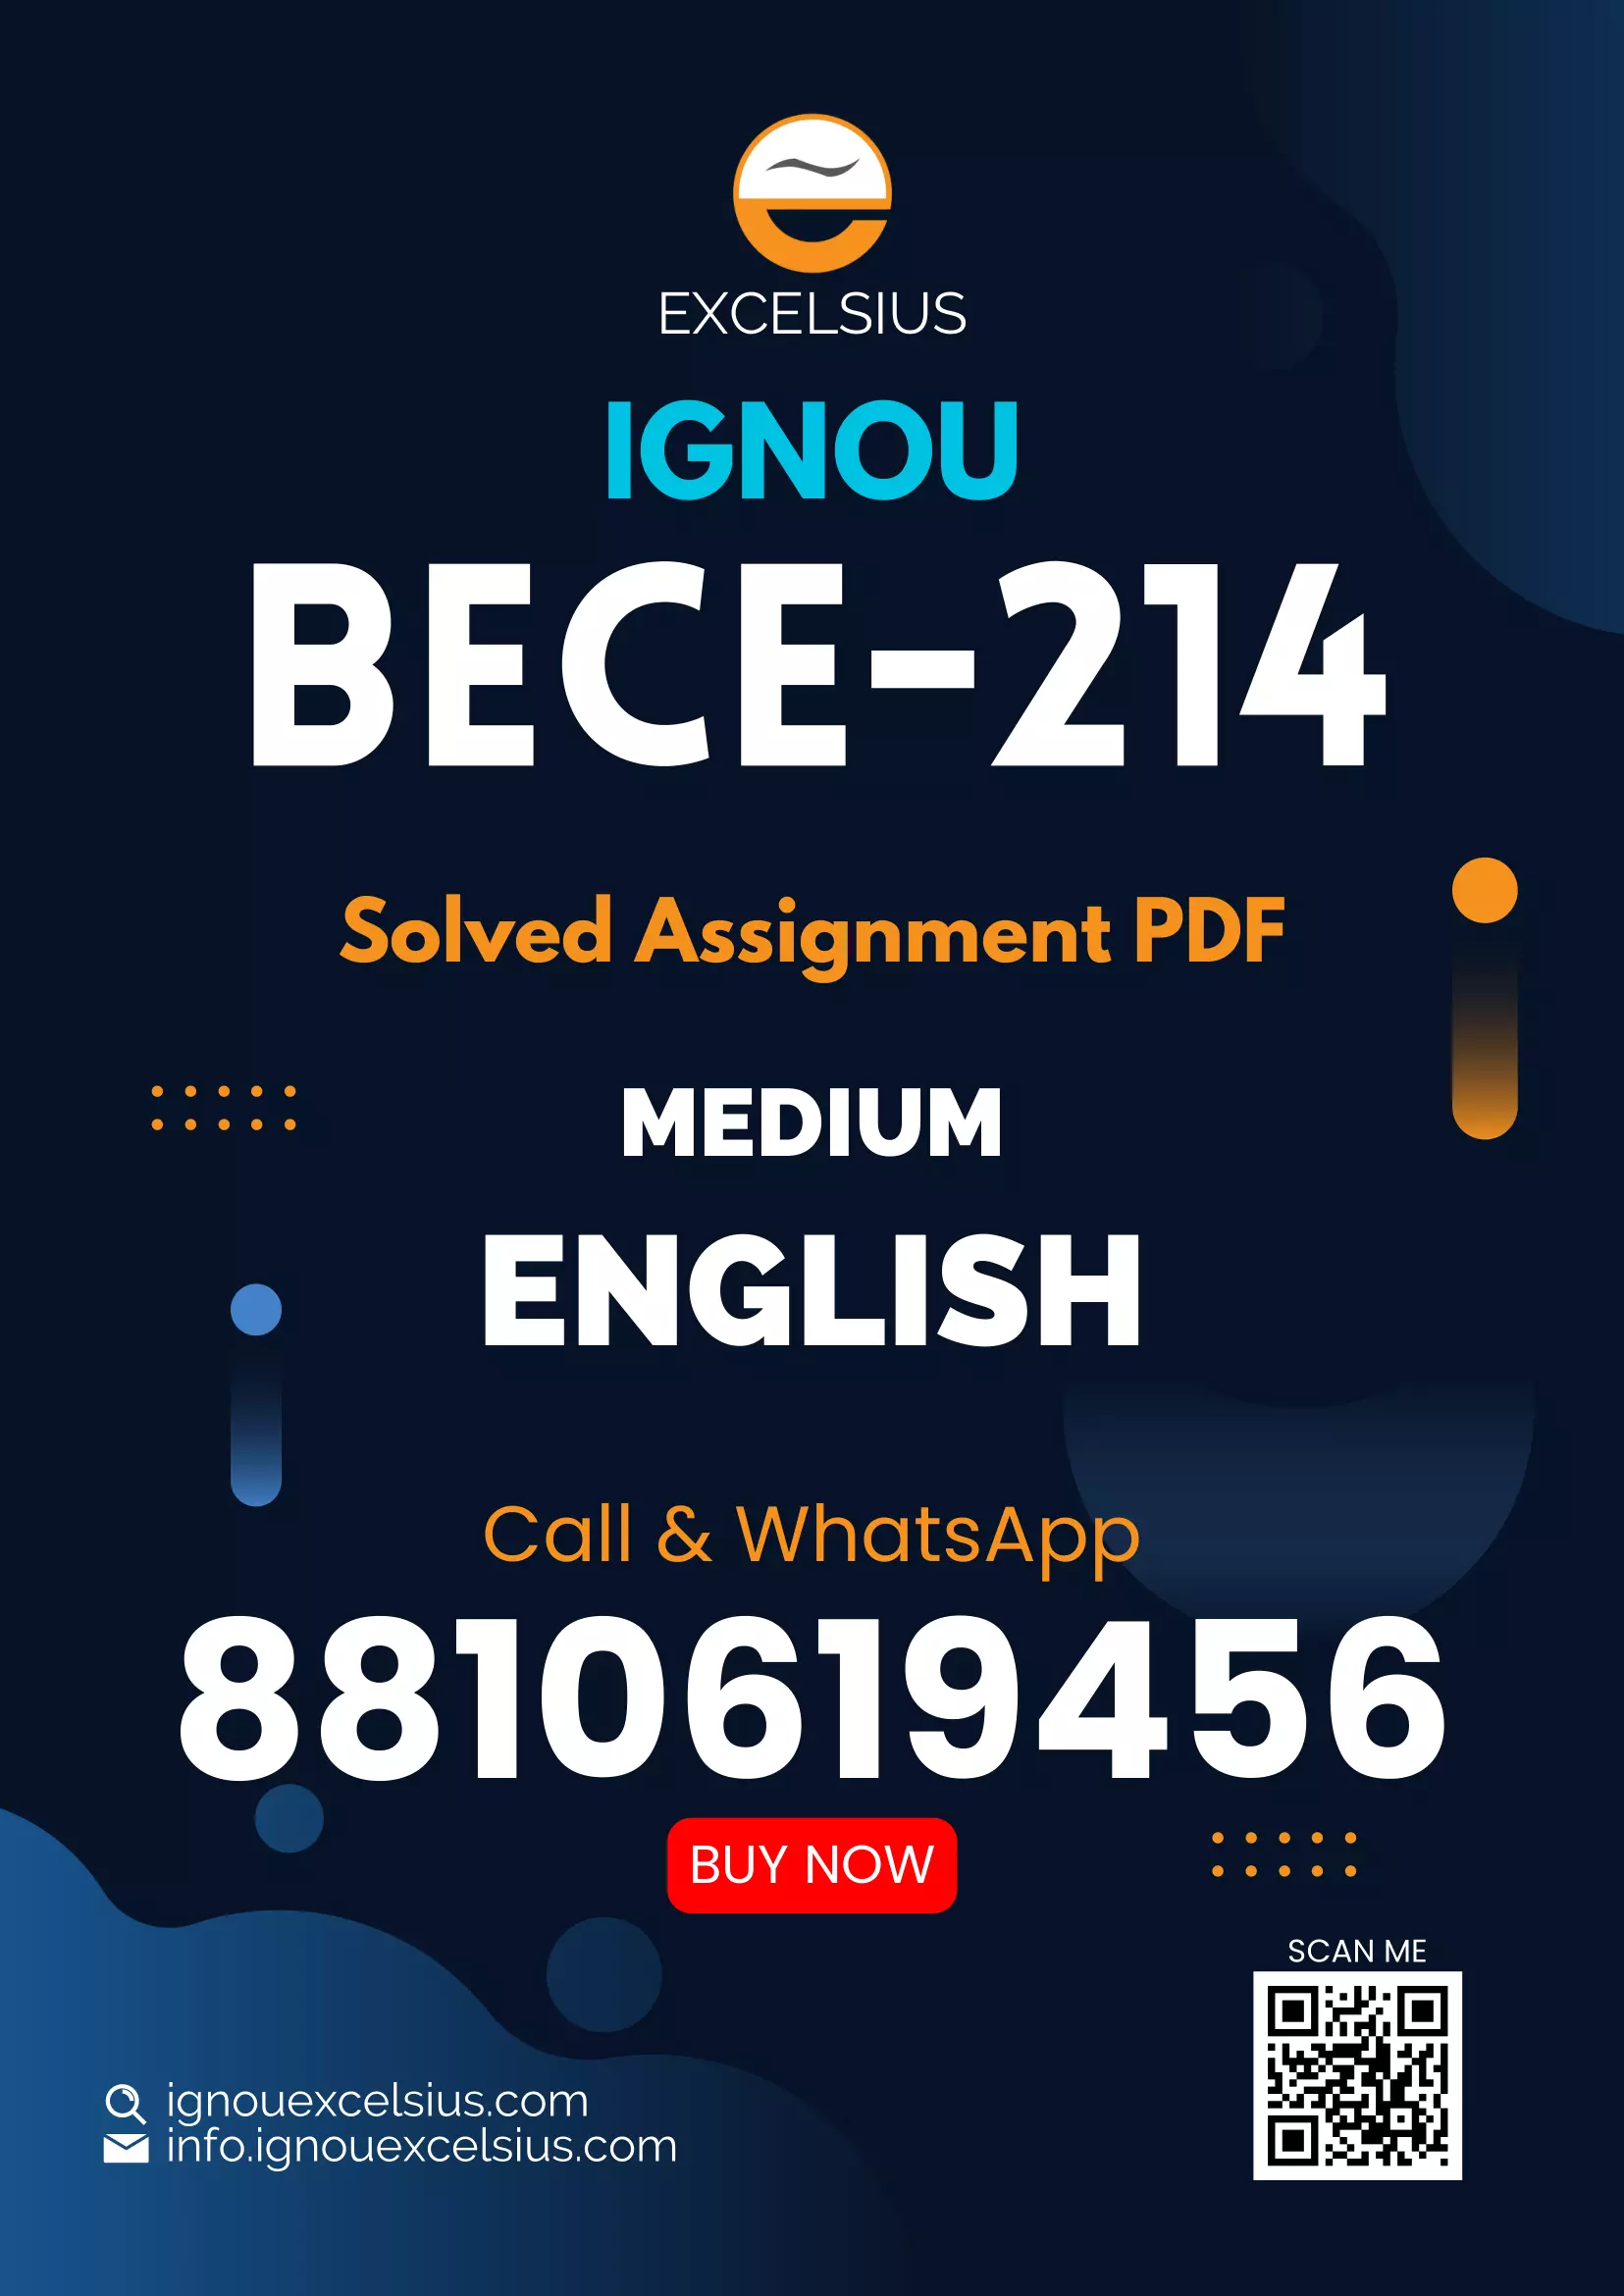 IGNOU BECE-214 - Agricultural Development in India, Latest Solved Assignment-July 2022 – January 2023